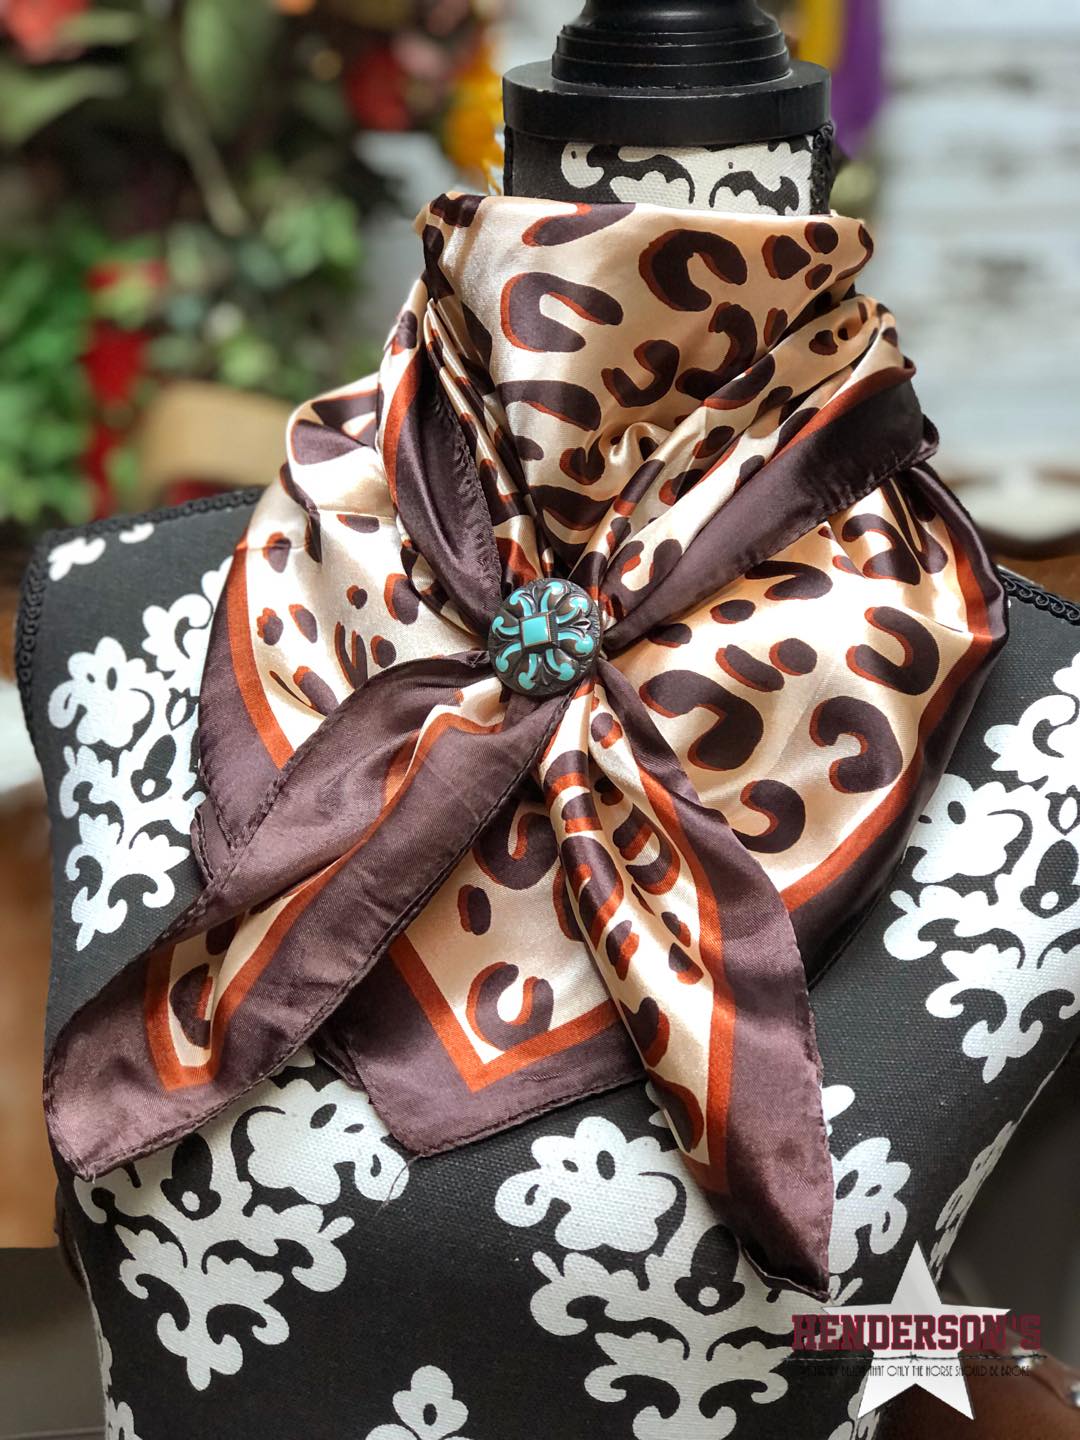 The Perfect Leopard Print Scarf for Fall